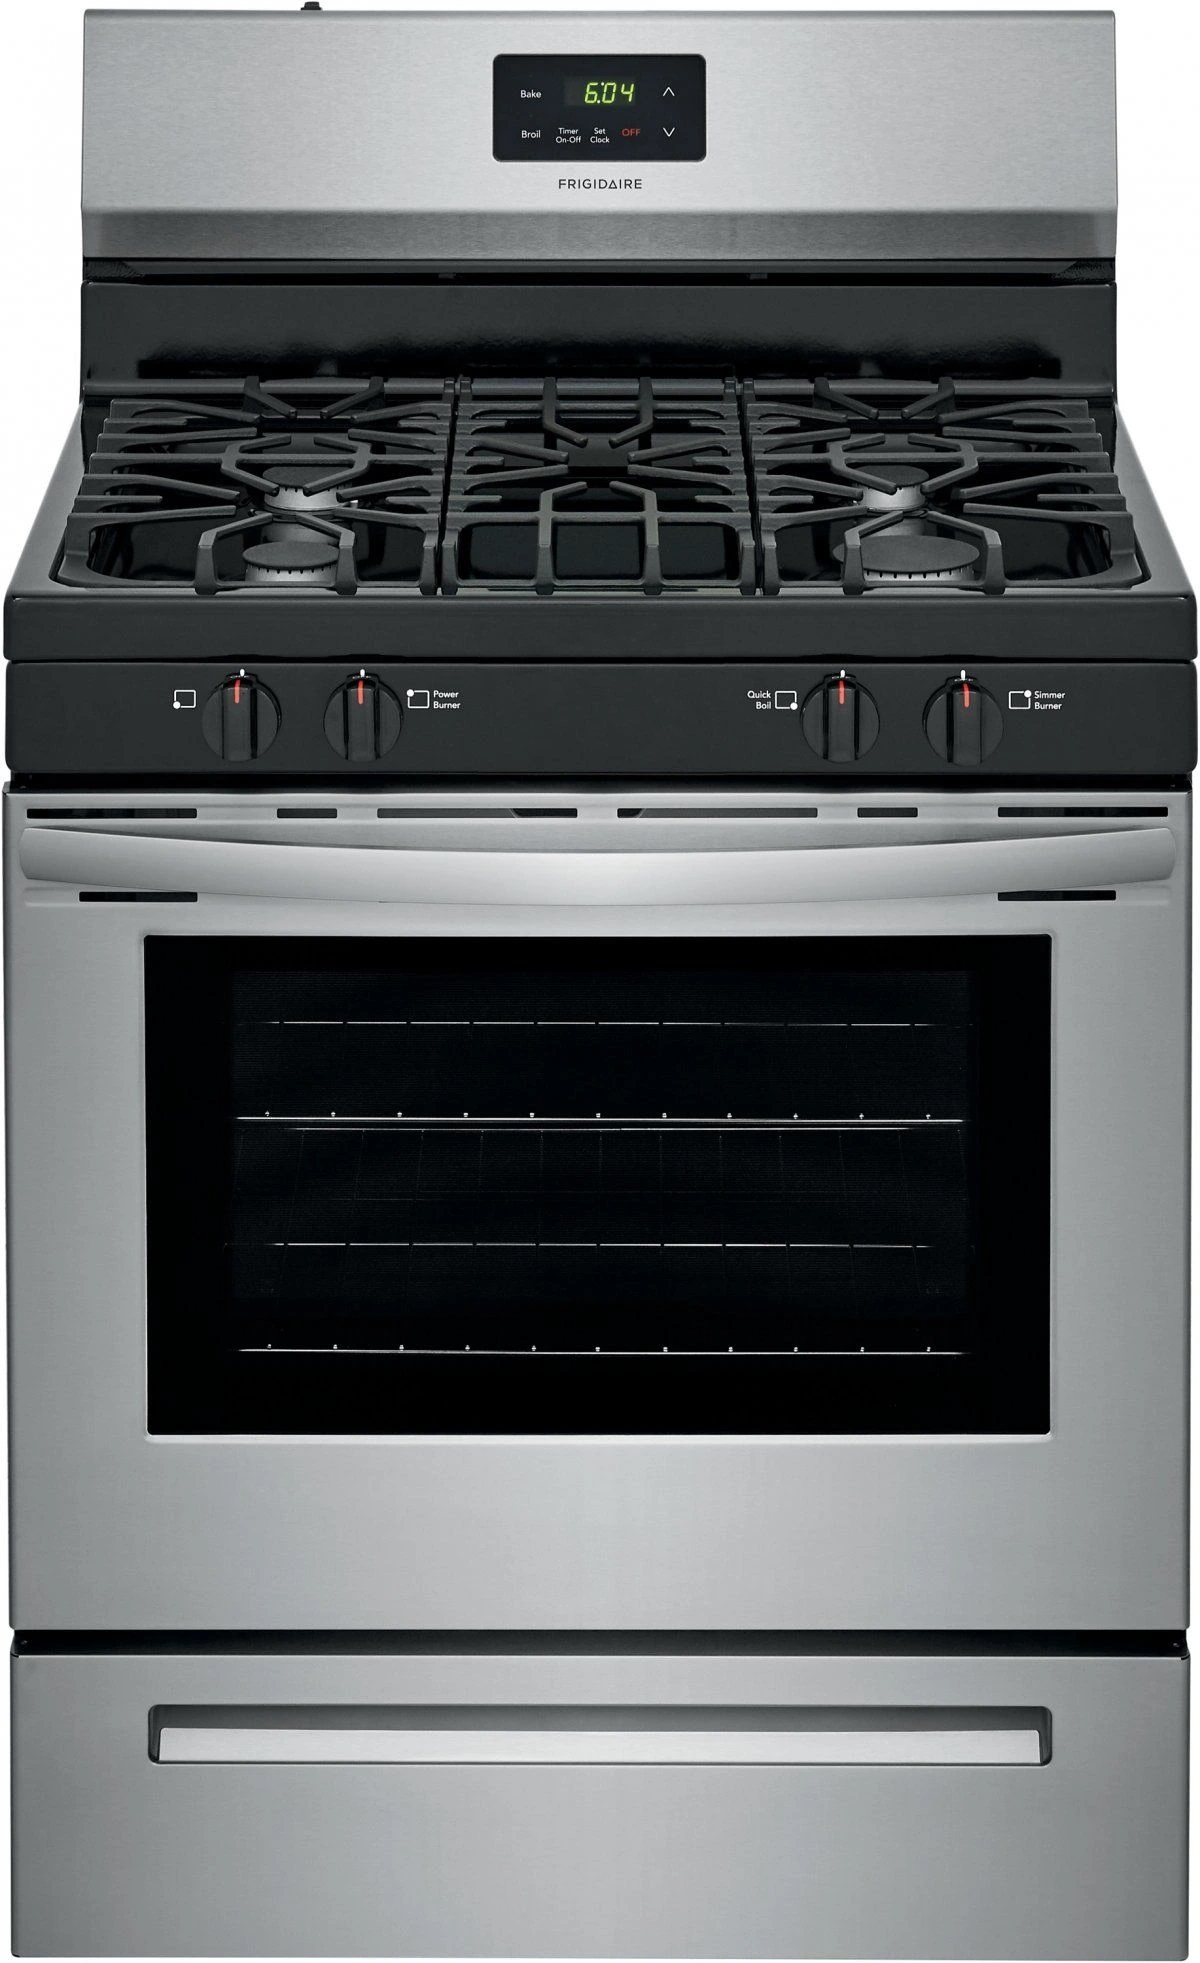 Front view of Frigidaire FCRG3051AS 30” freestanding gas range 